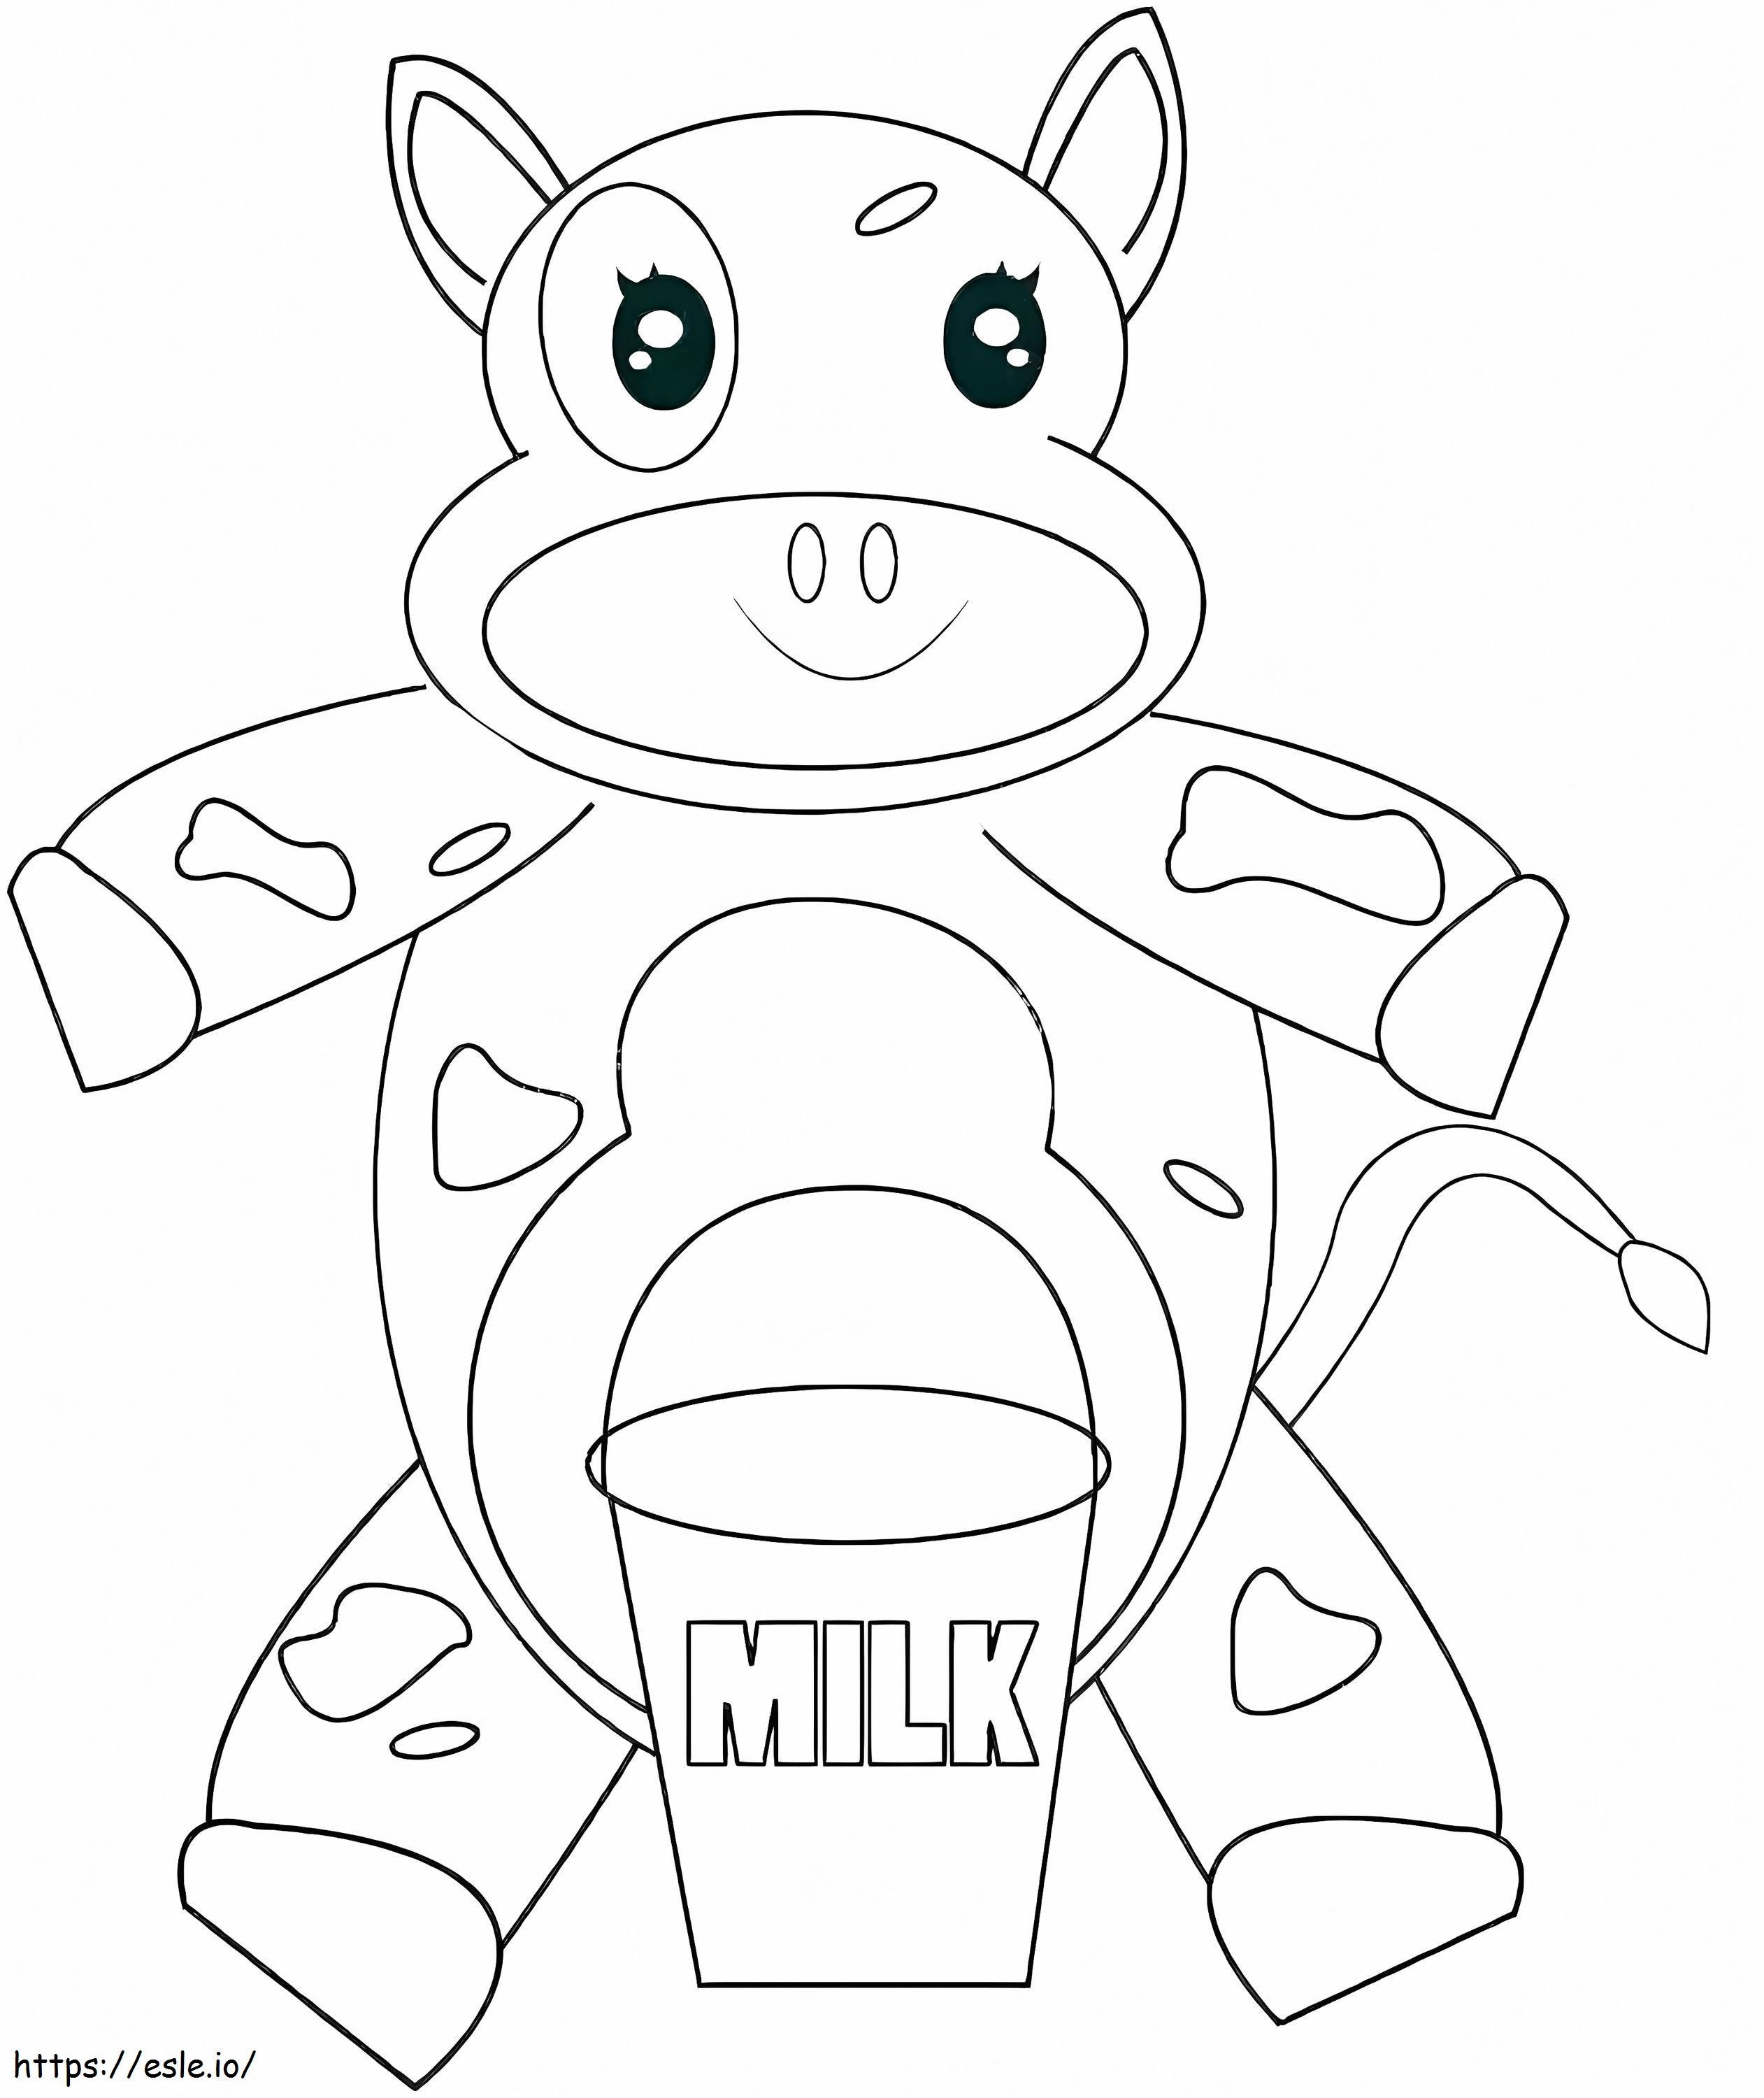 1570527081 Cow Coloring Sheets Cow Book Cow Cow Cow Cartoon Coloring Sheets For Toddlers coloring page